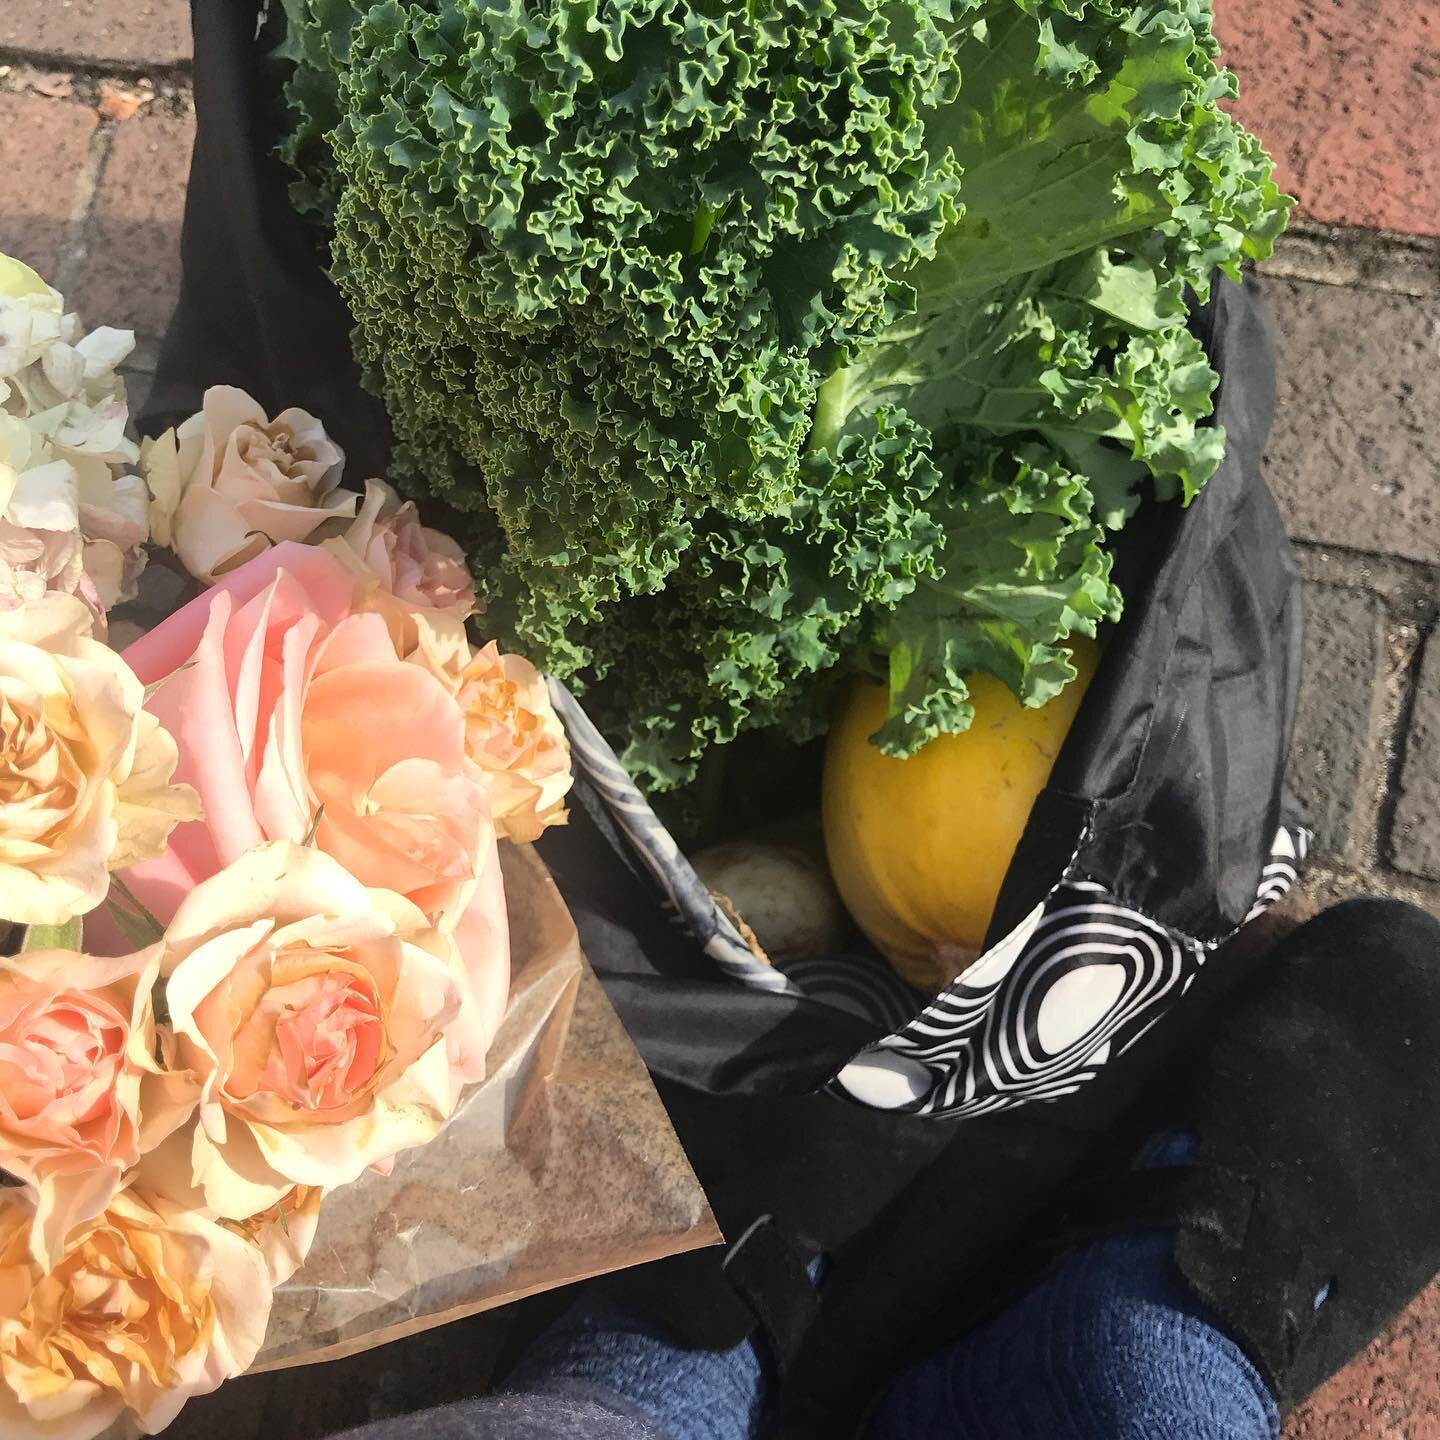 I&rsquo;m still here! Still Whole30! I&rsquo;m grateful that we have a winter farmers market (even though it doesn&rsquo;t feel like winter here today). I got kale, spaghetti squash and turnips. Woot! #whole30 #januarywhole30 #eastonfarmersmarket #sa